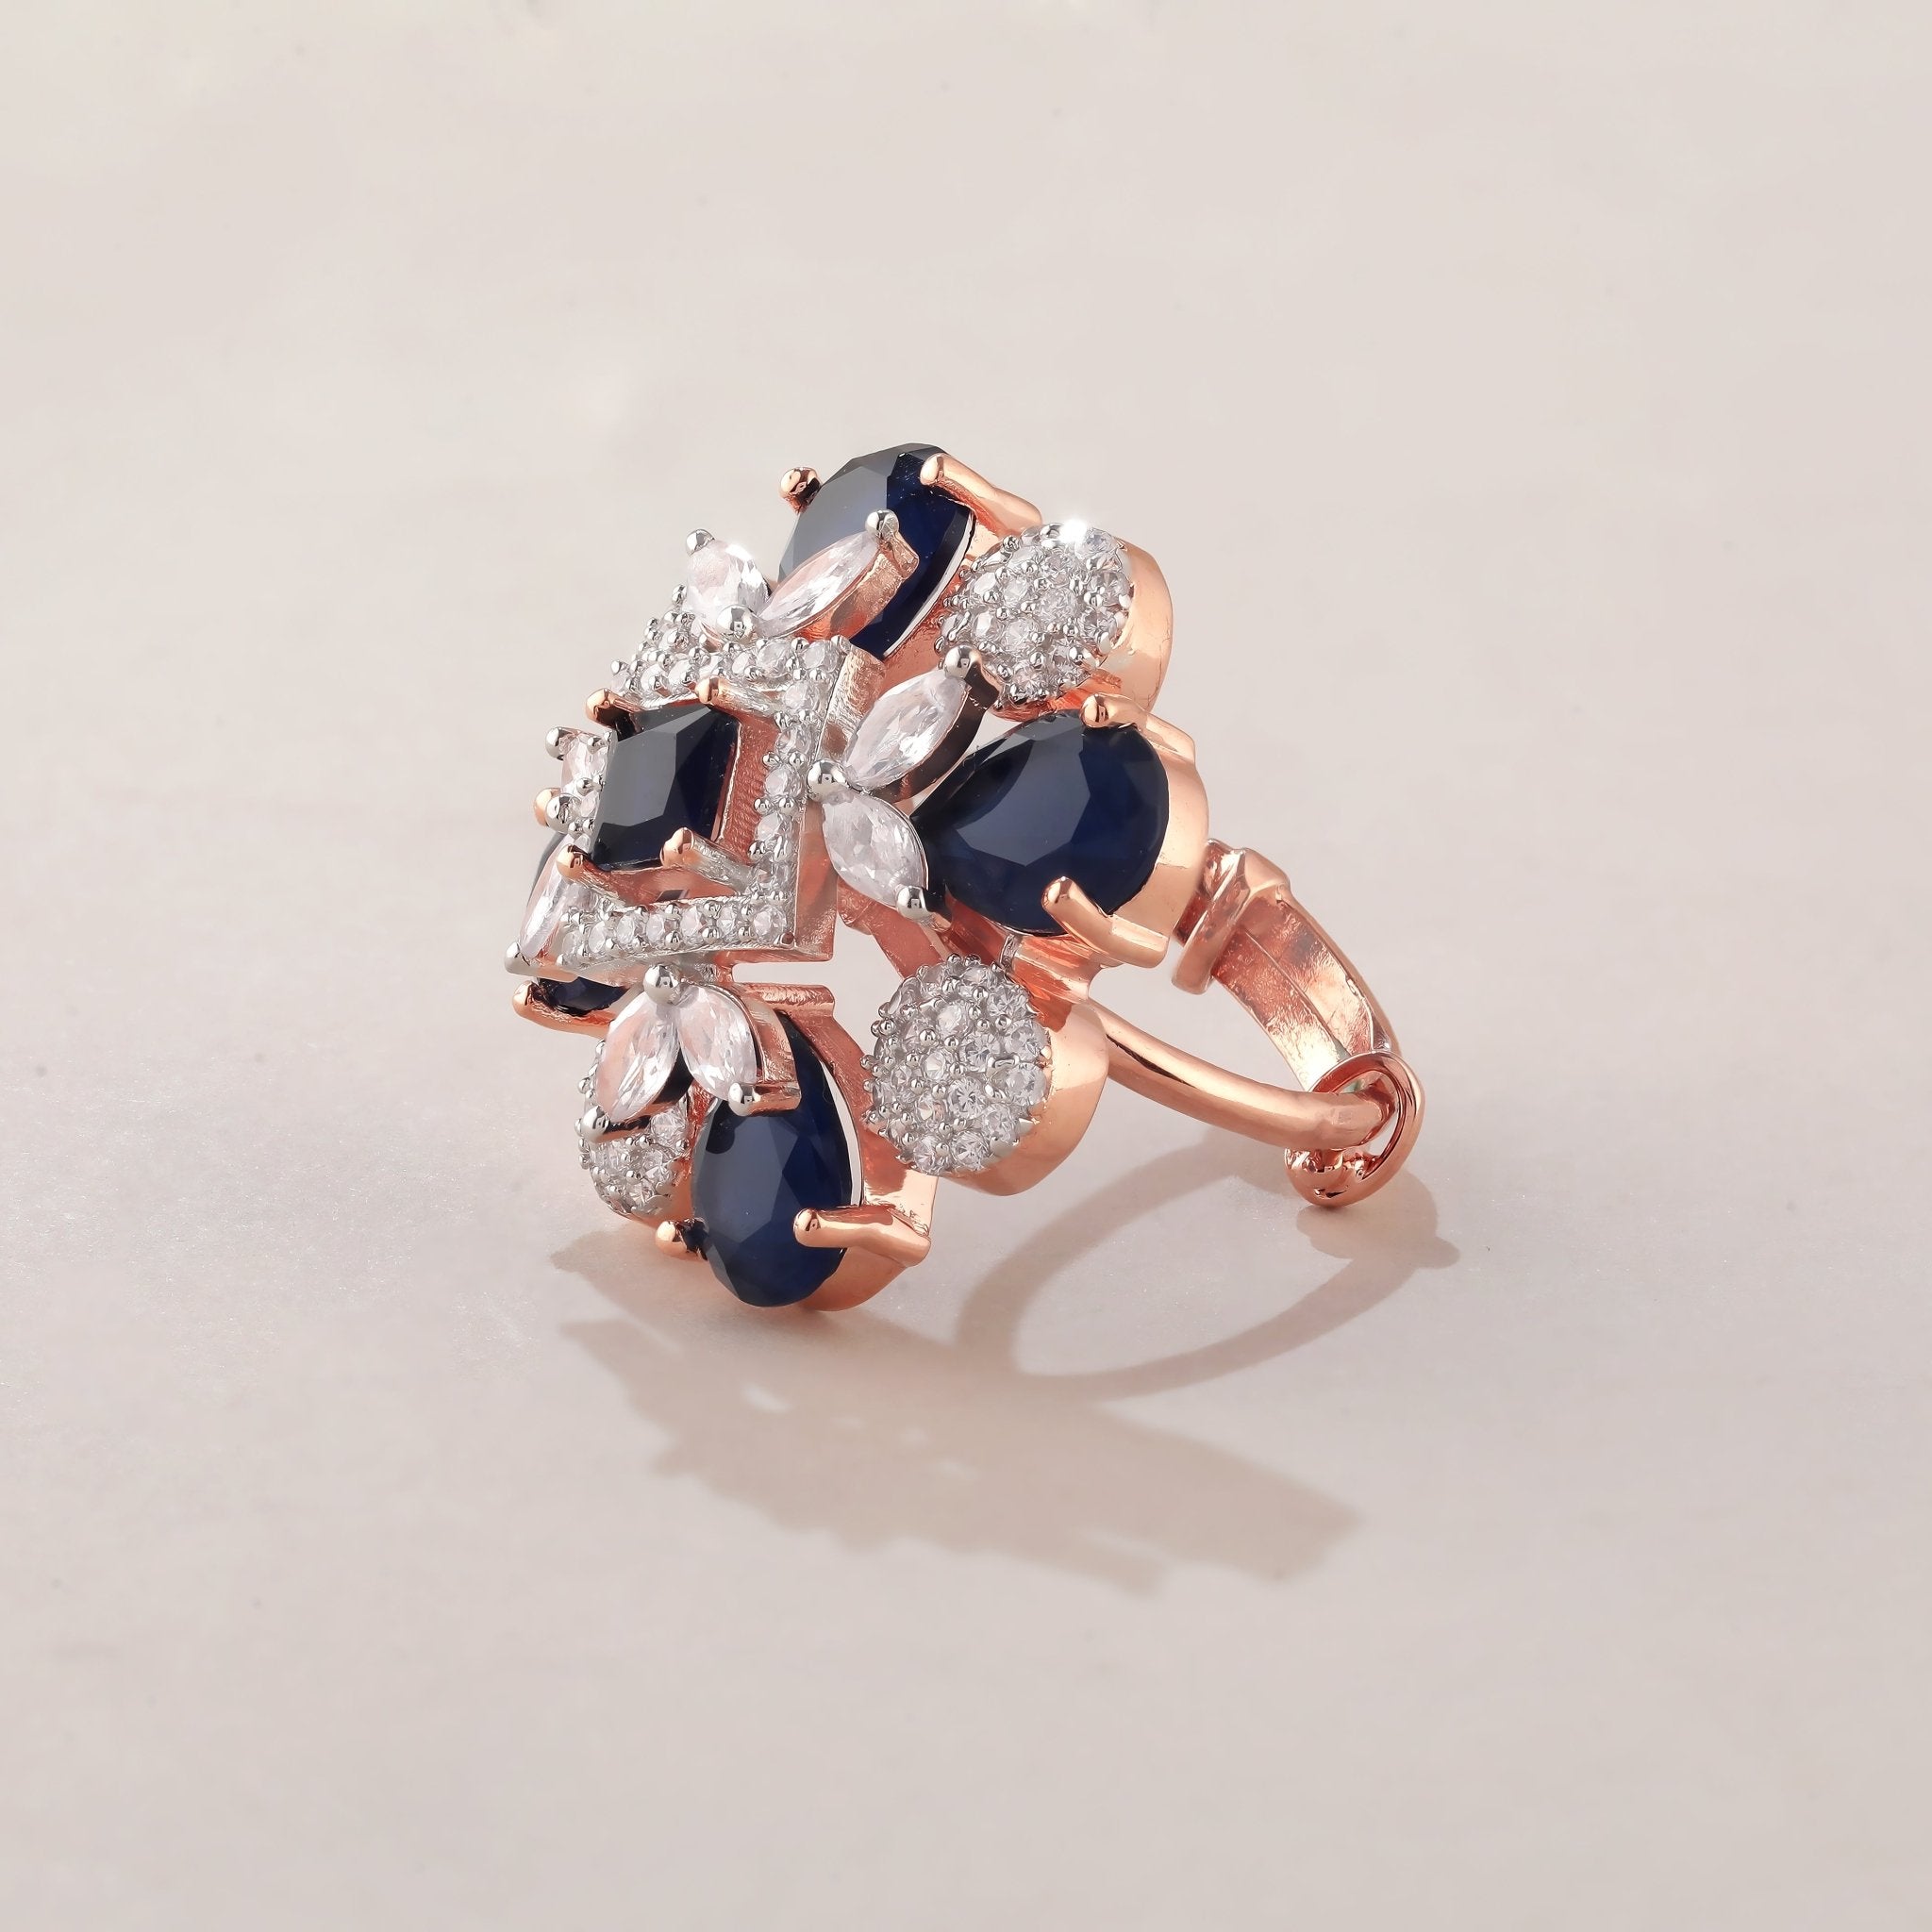 Blue EleganceRosegold Ladies Ring with Blue, cz stones - Shining Silver.in